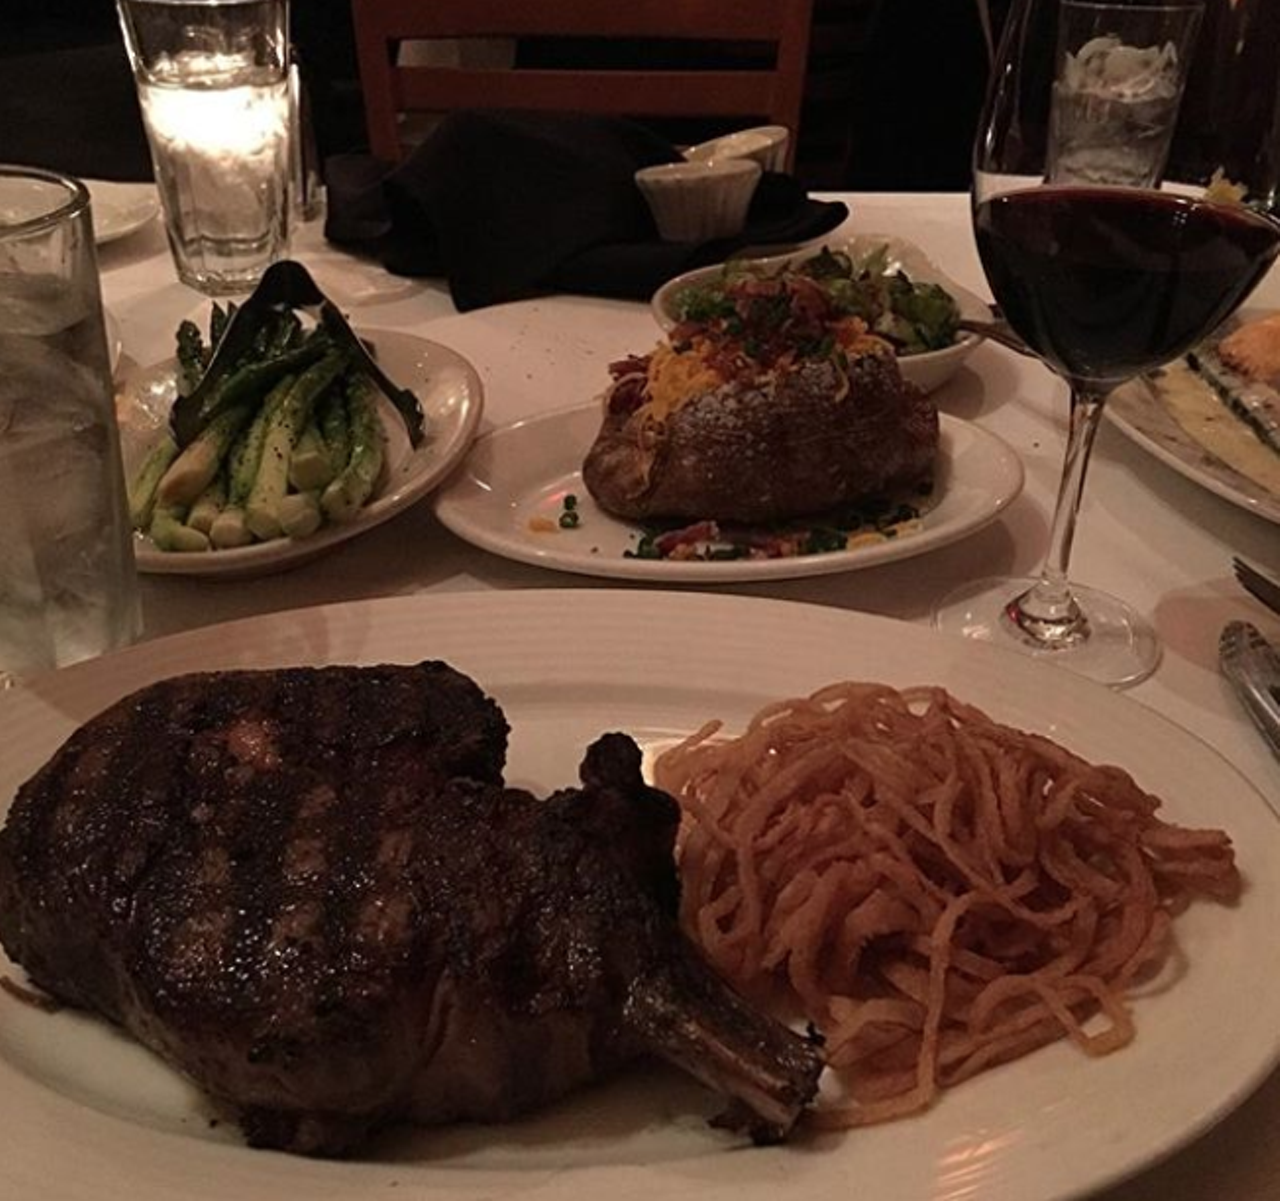 Kirby’s Steakhouse
123 N Loop 1604 E, (210) 404-2221, kirbyssteakhouse.com
Go for something with a twist and order up the pepper steak – the Filet Mignon pressed in cracked peppercorn and Cognac pepper sauce.
Photo via Instagram / xayevier